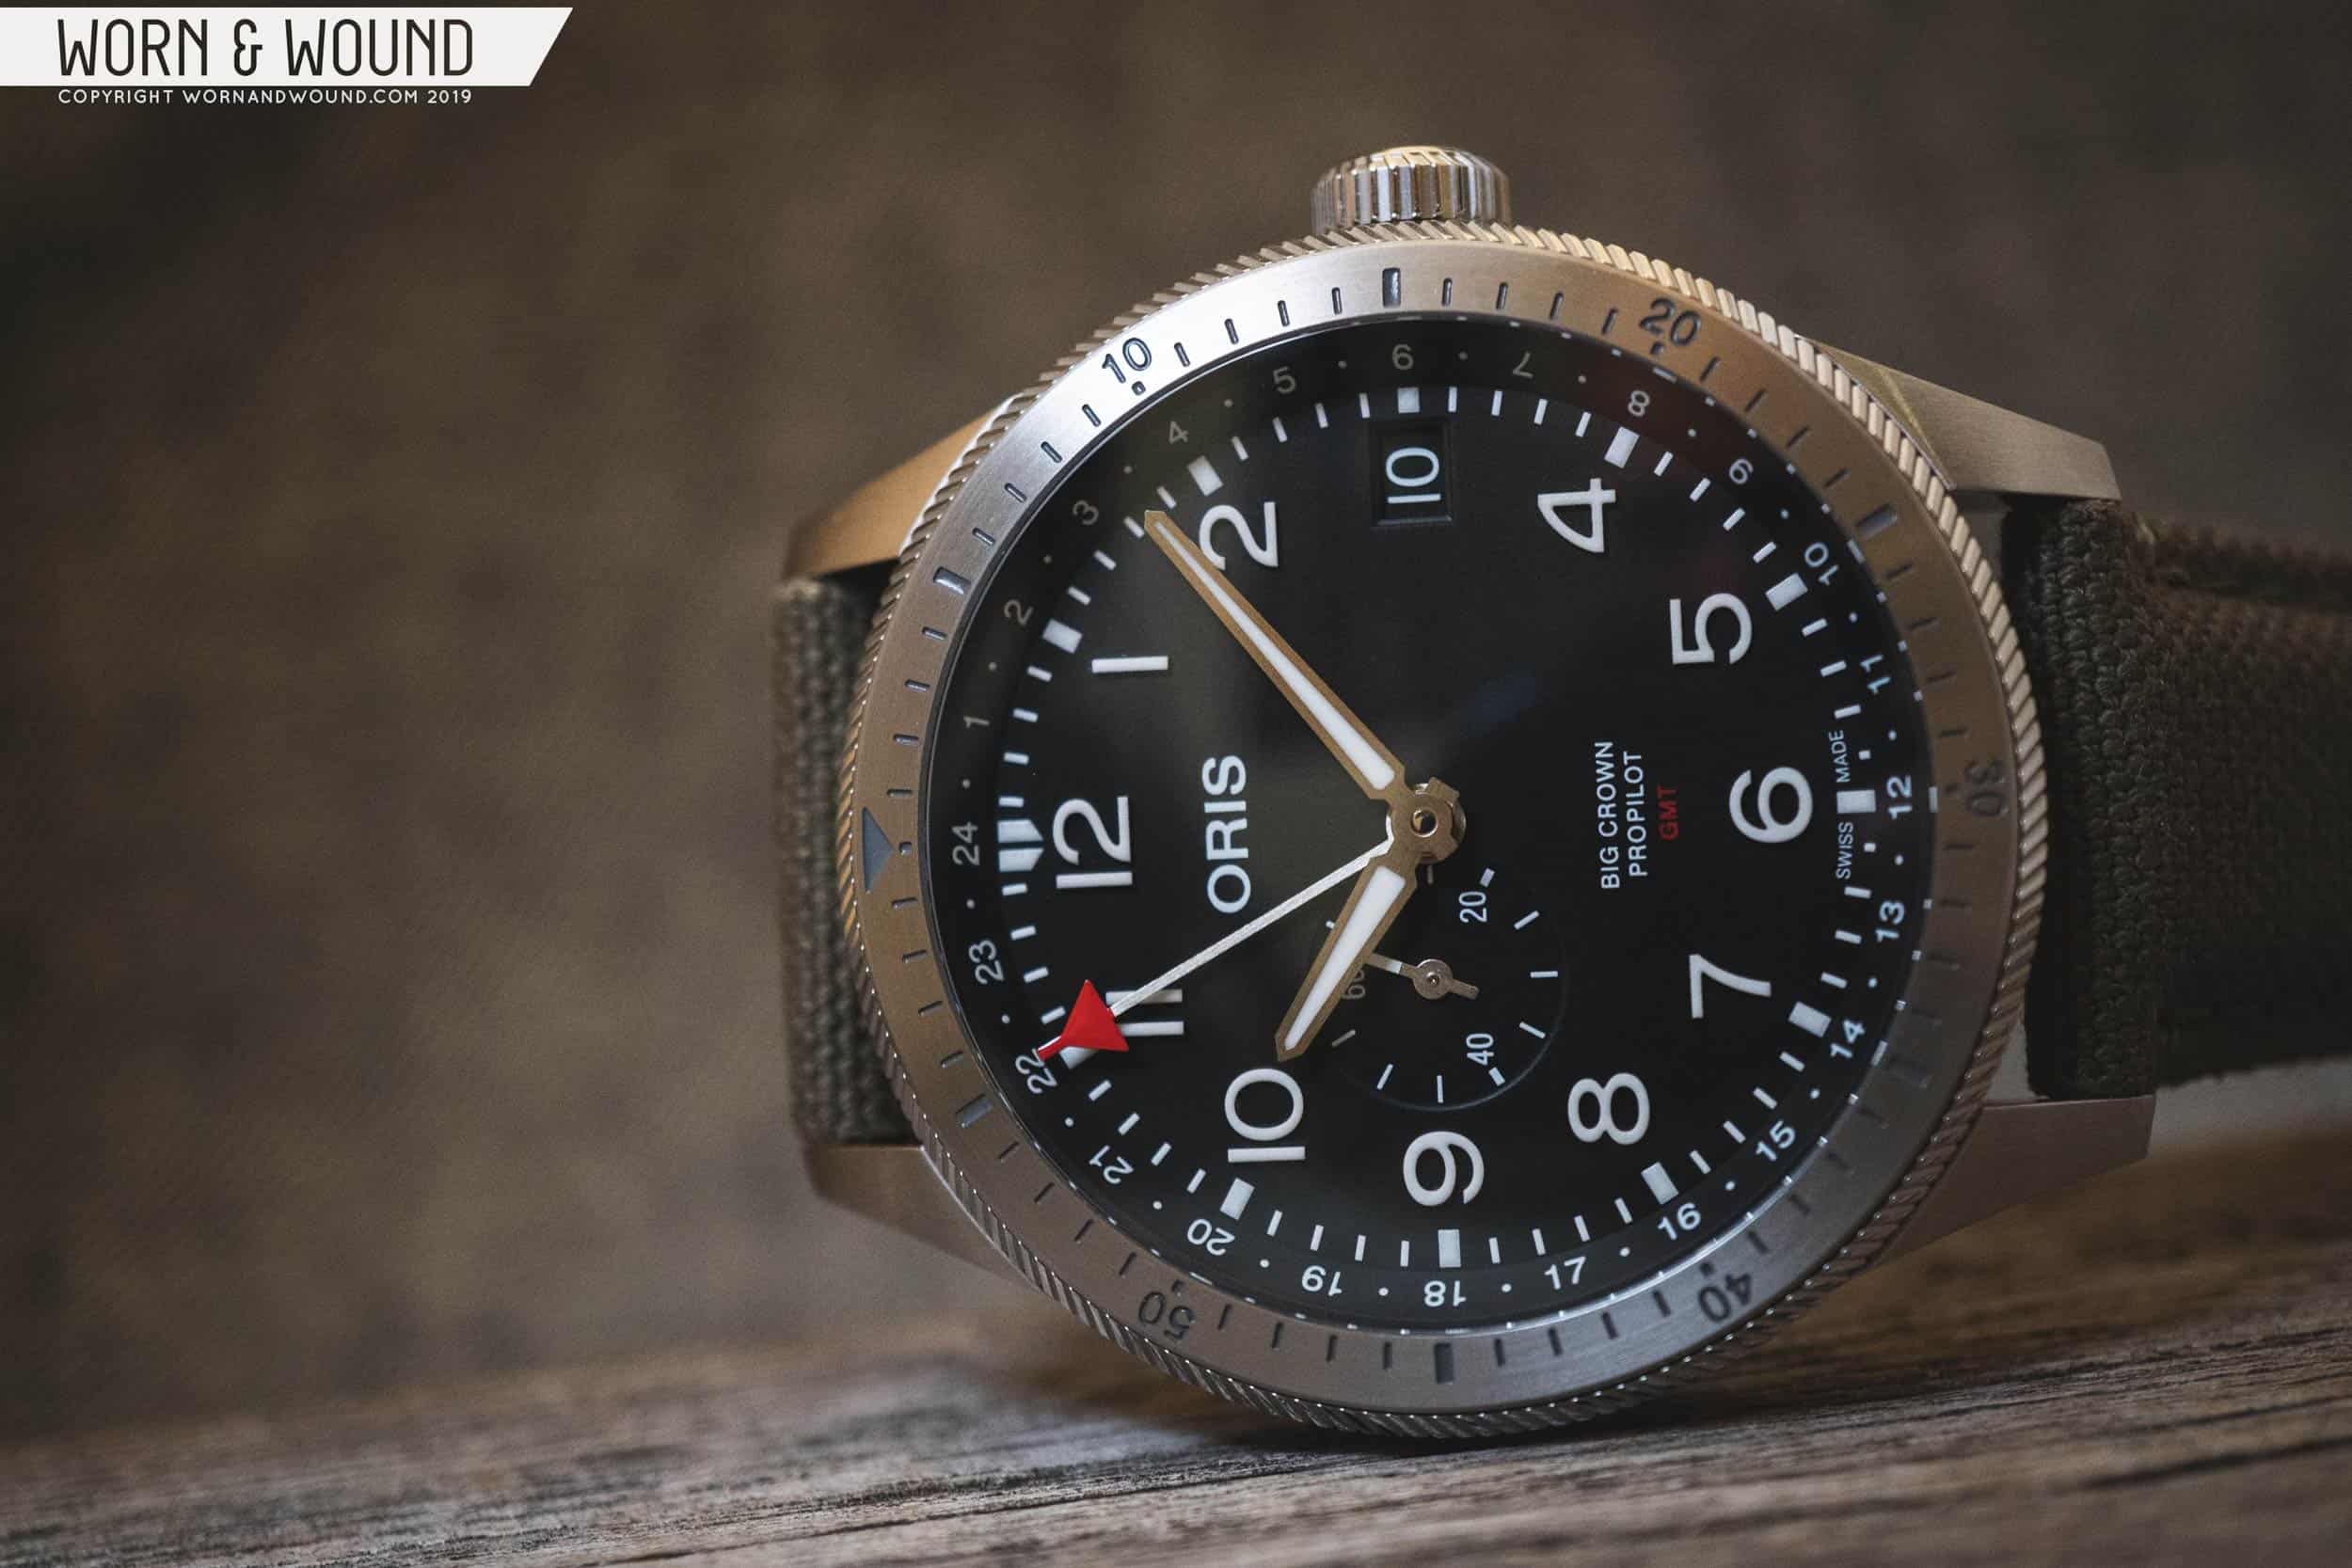 Baselworld 2019: First Look at the Oris Big Crown ProPilot Timer GMT